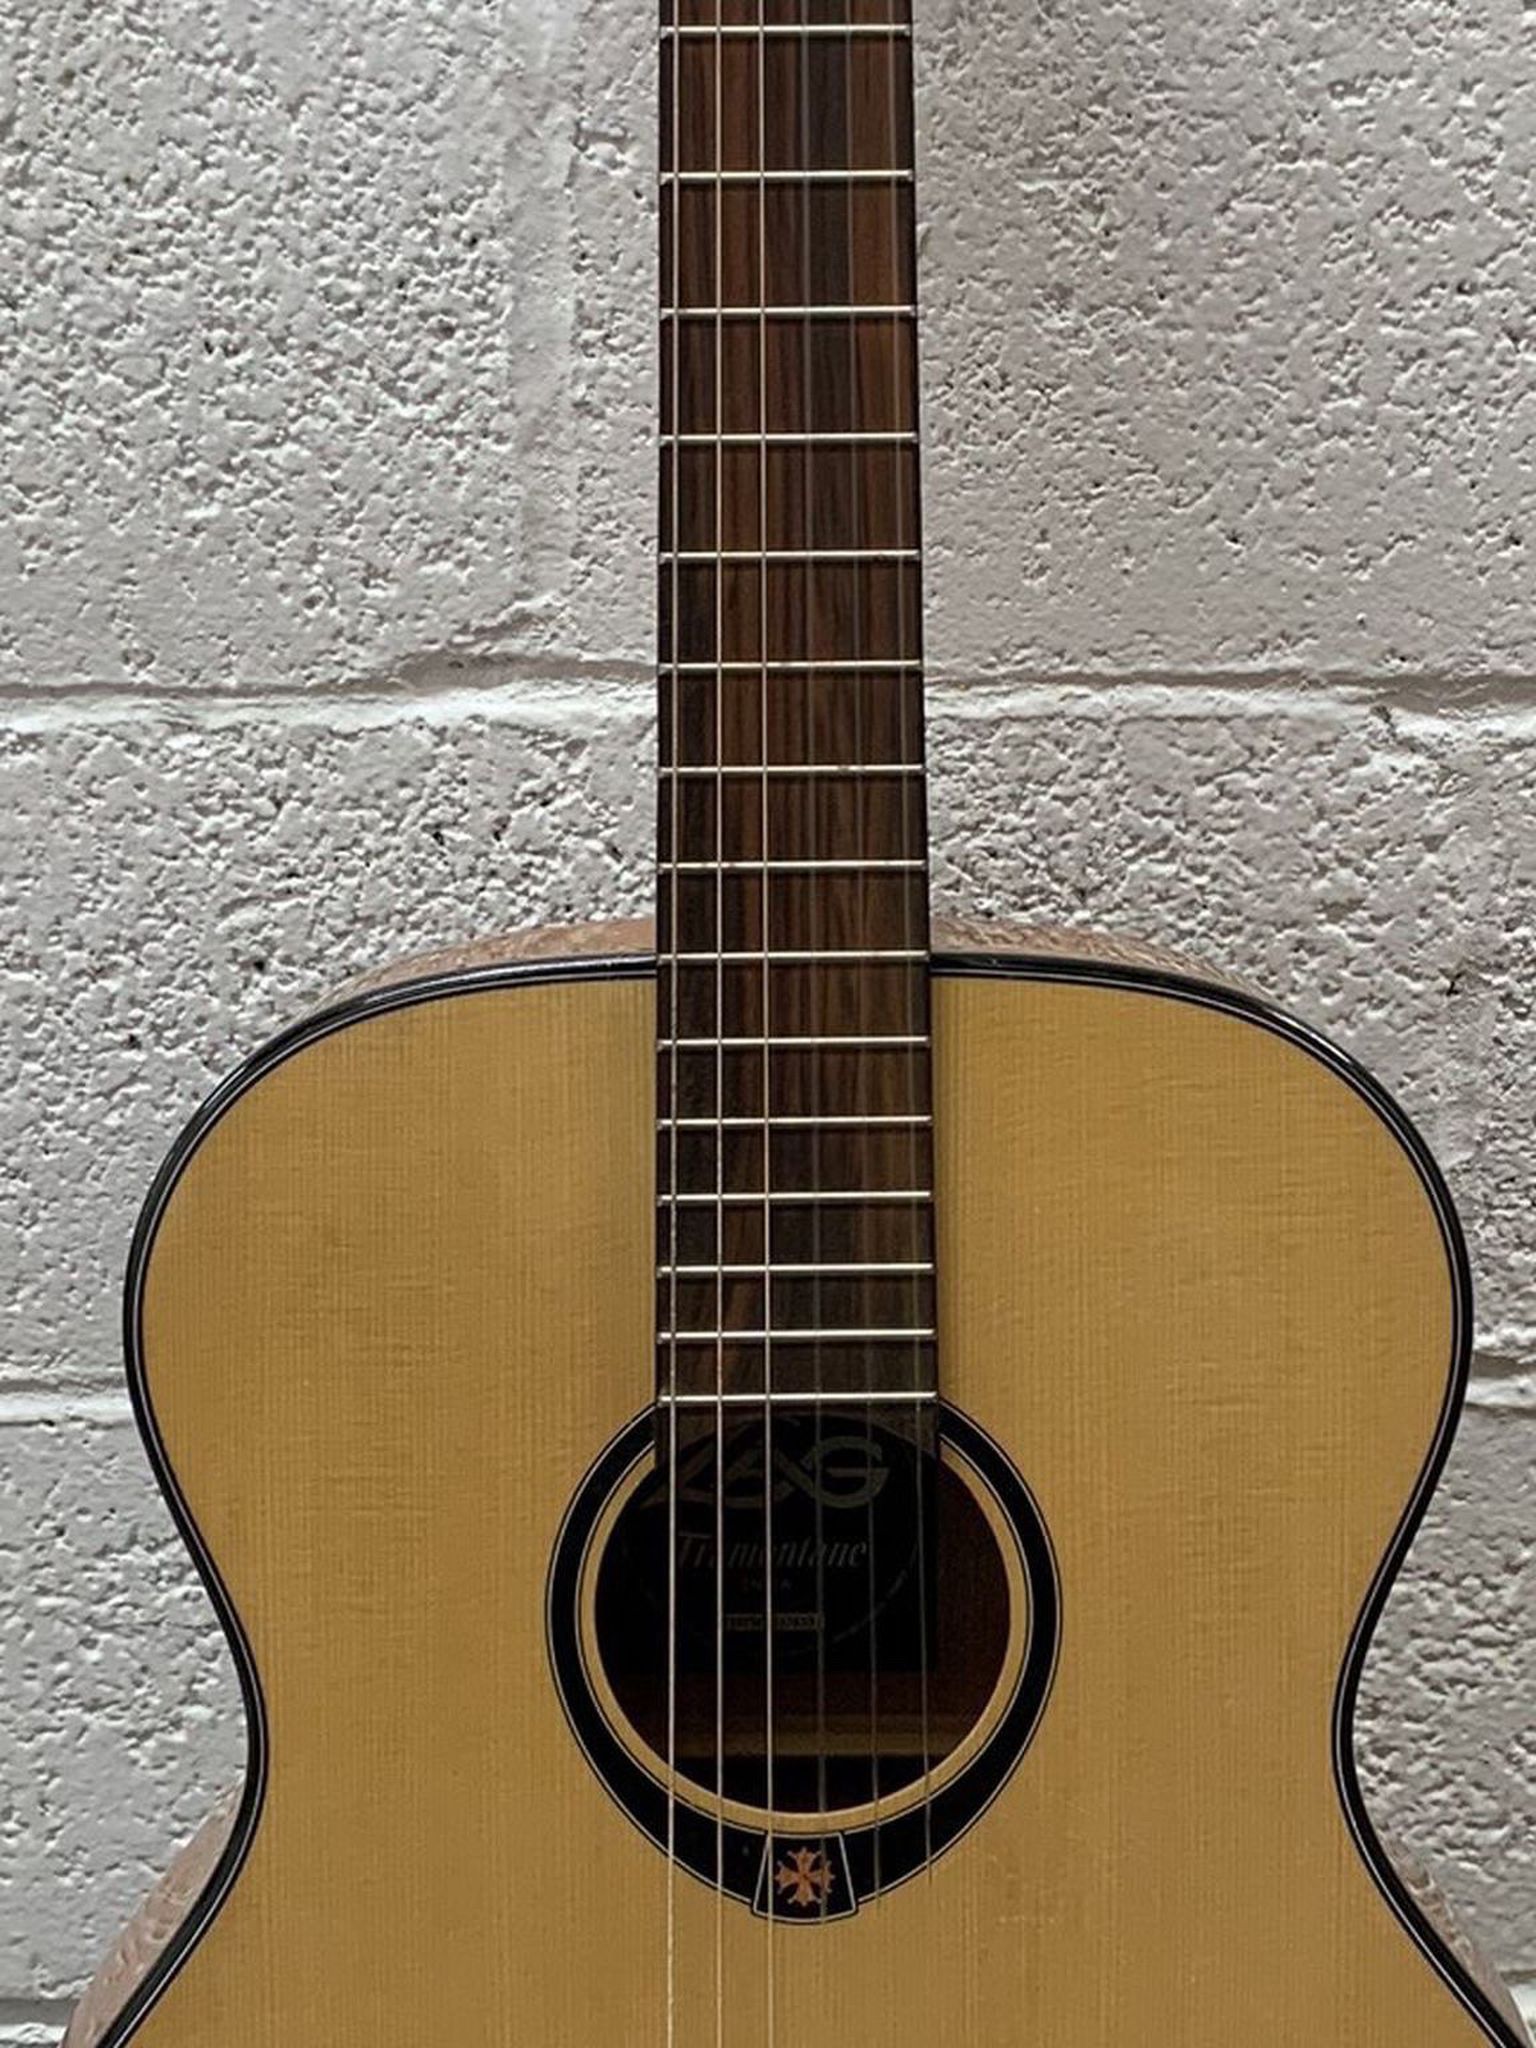 Acoustic Guitar Almost New